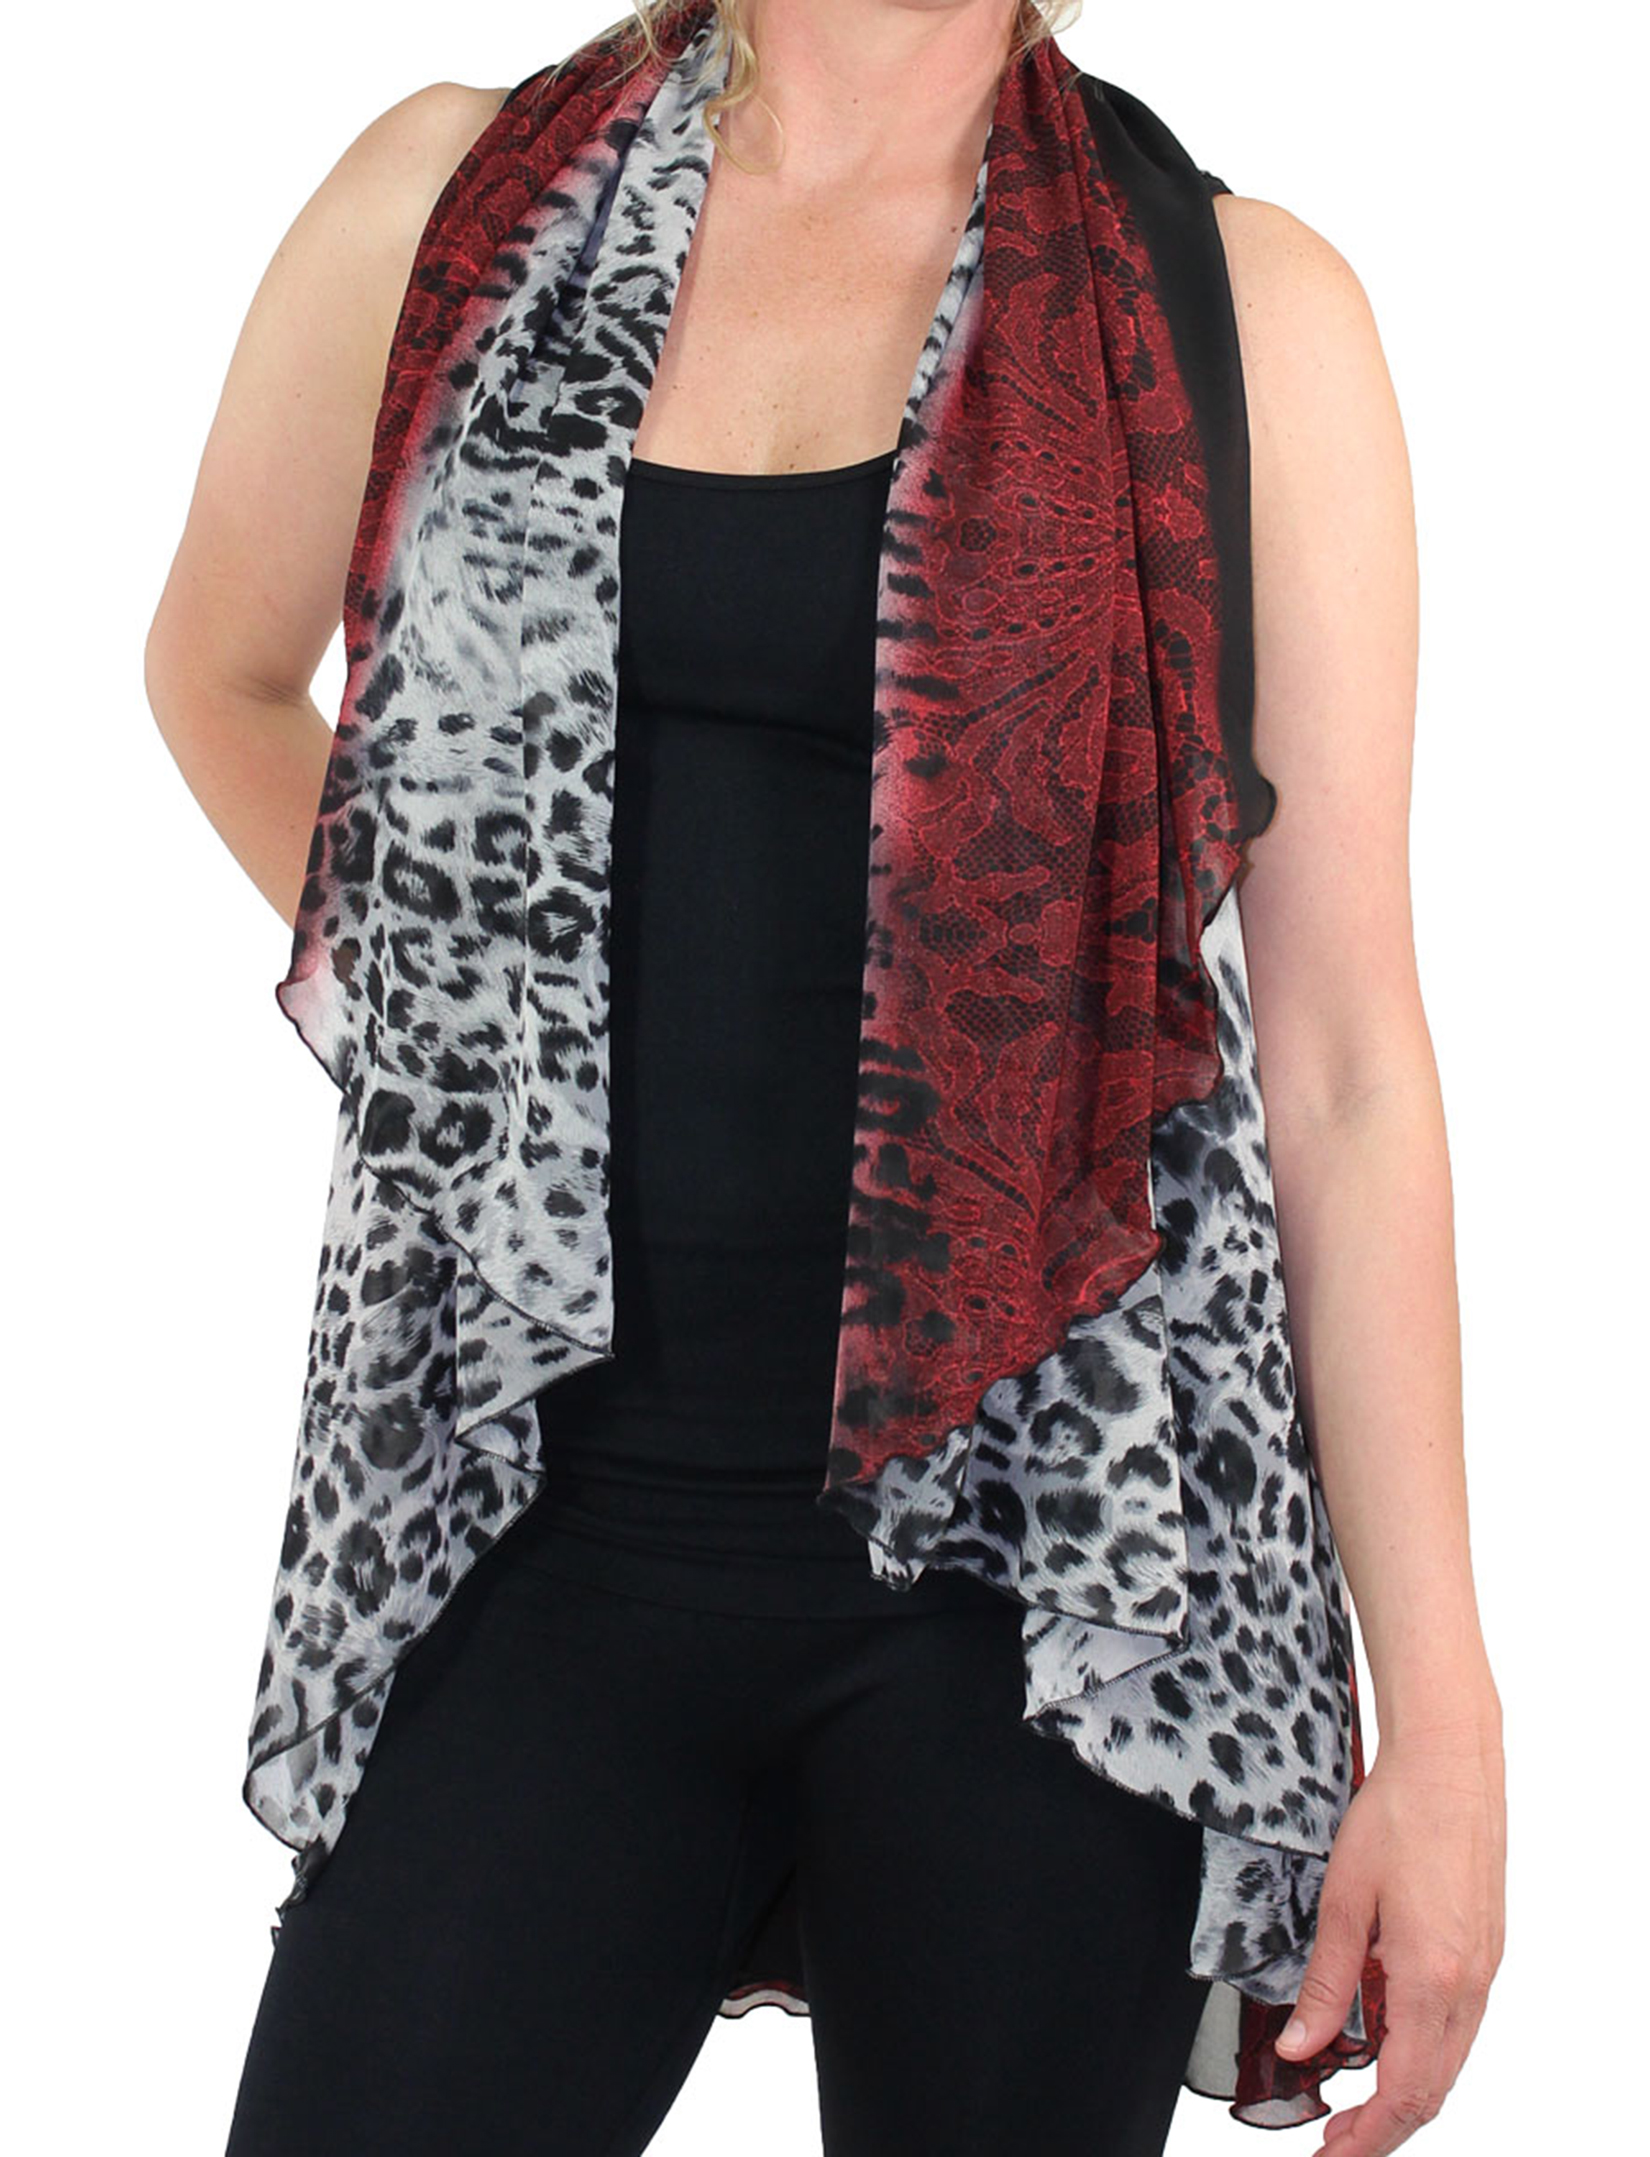 #0018 Leopard & Lace - Red